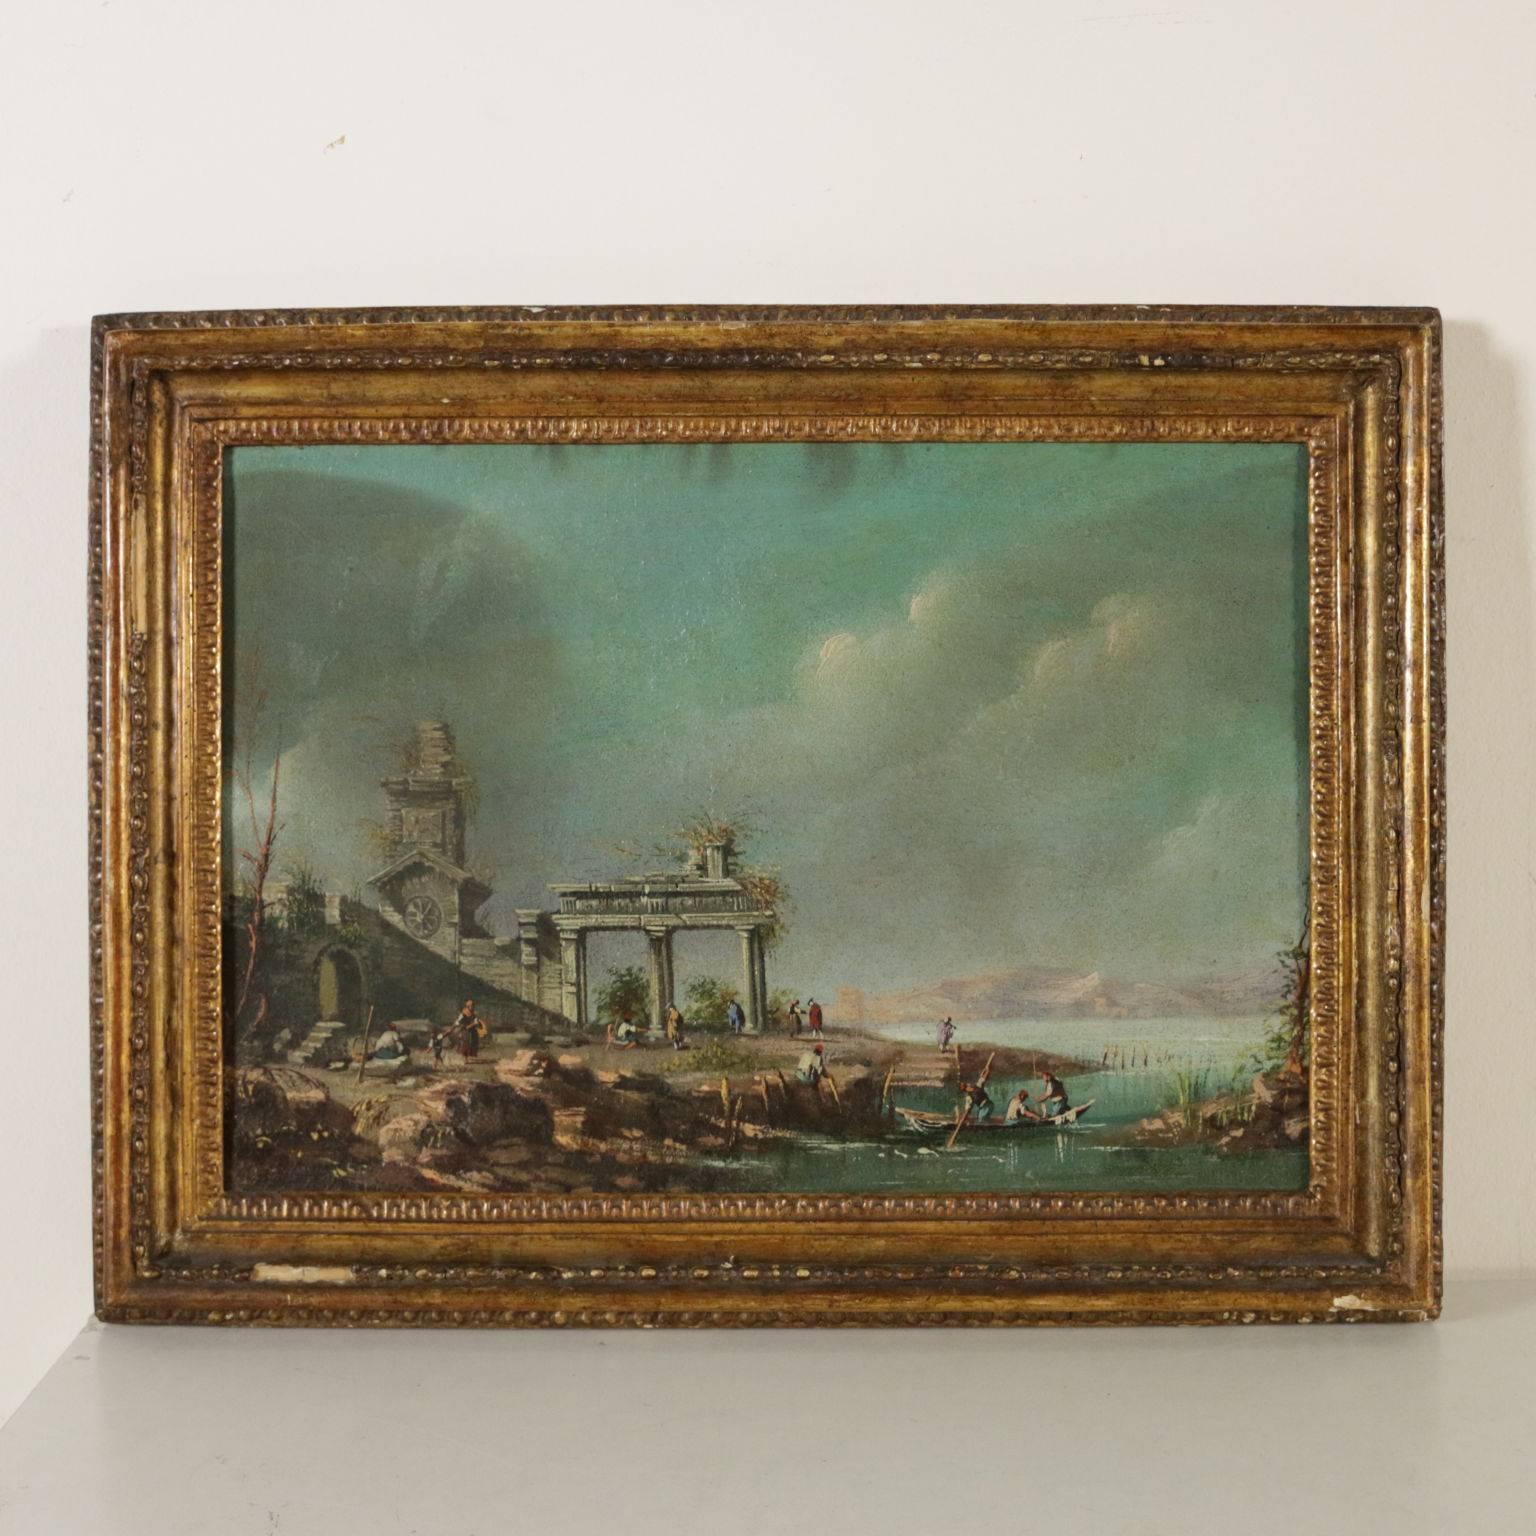 Oil on canvas. The architectural paintings are set on the sea coast and populated with common people and fishers. Restored and relined, the paintings are presented in adjusted frames of the 19th century. 